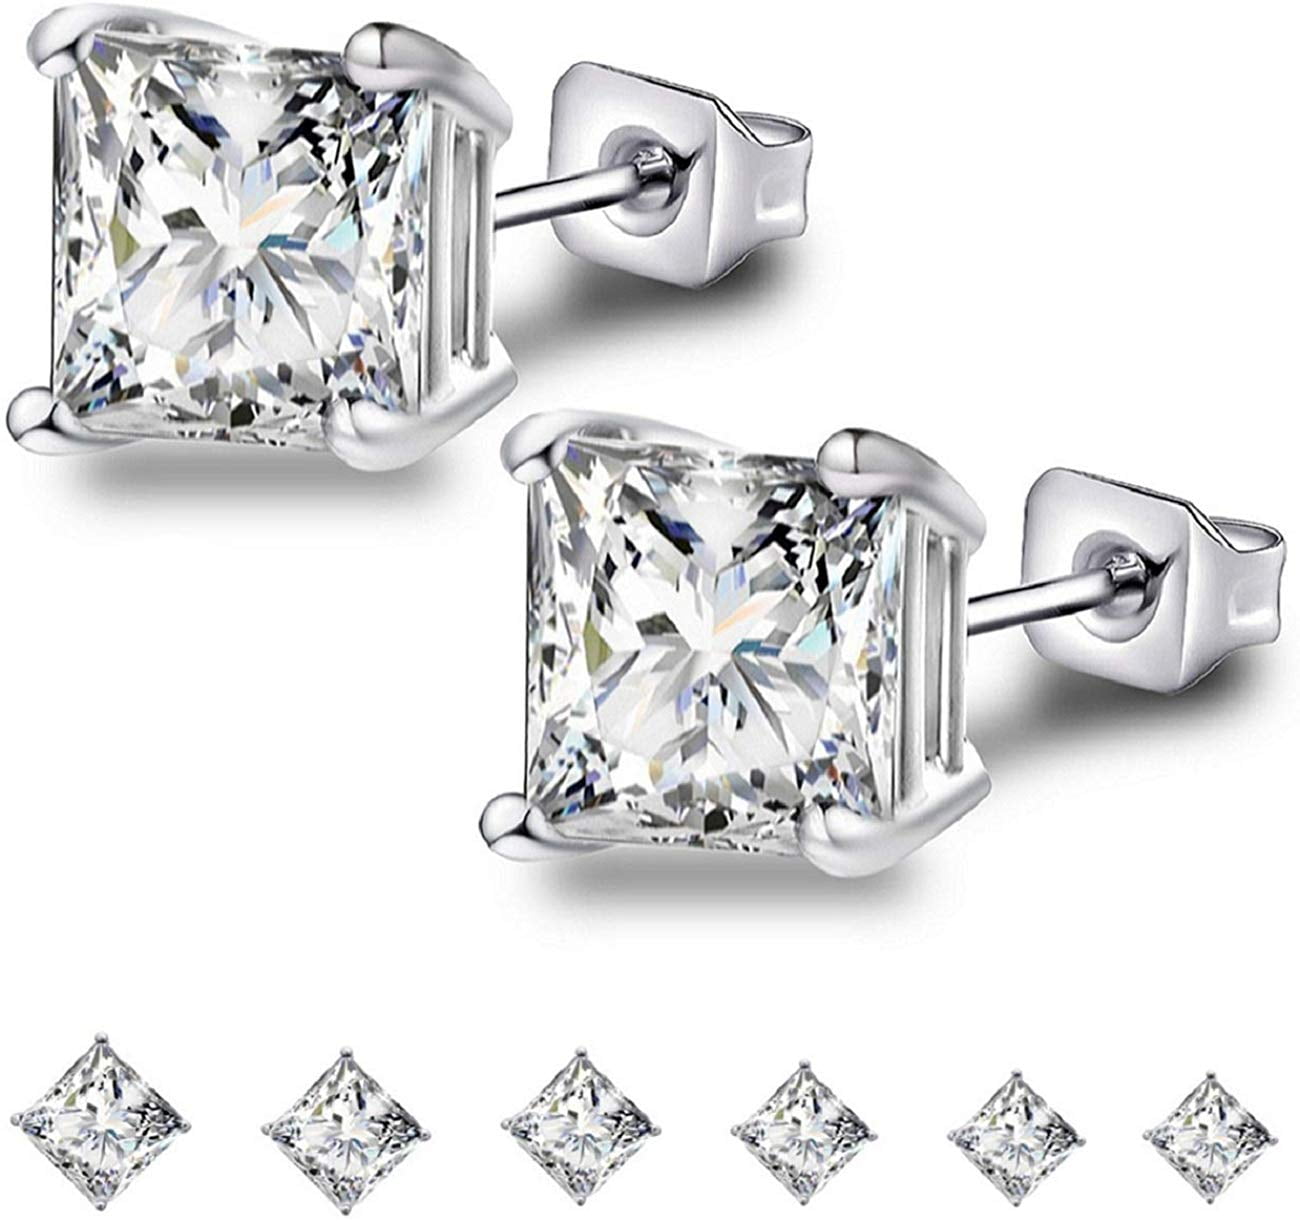 925 Sterling Silver Princess Cut Cubic Zirconia Stud Earrings Available in 3mm 4mm 5mm 6mm 7mm 8mm Hypoallergenic Jewelry